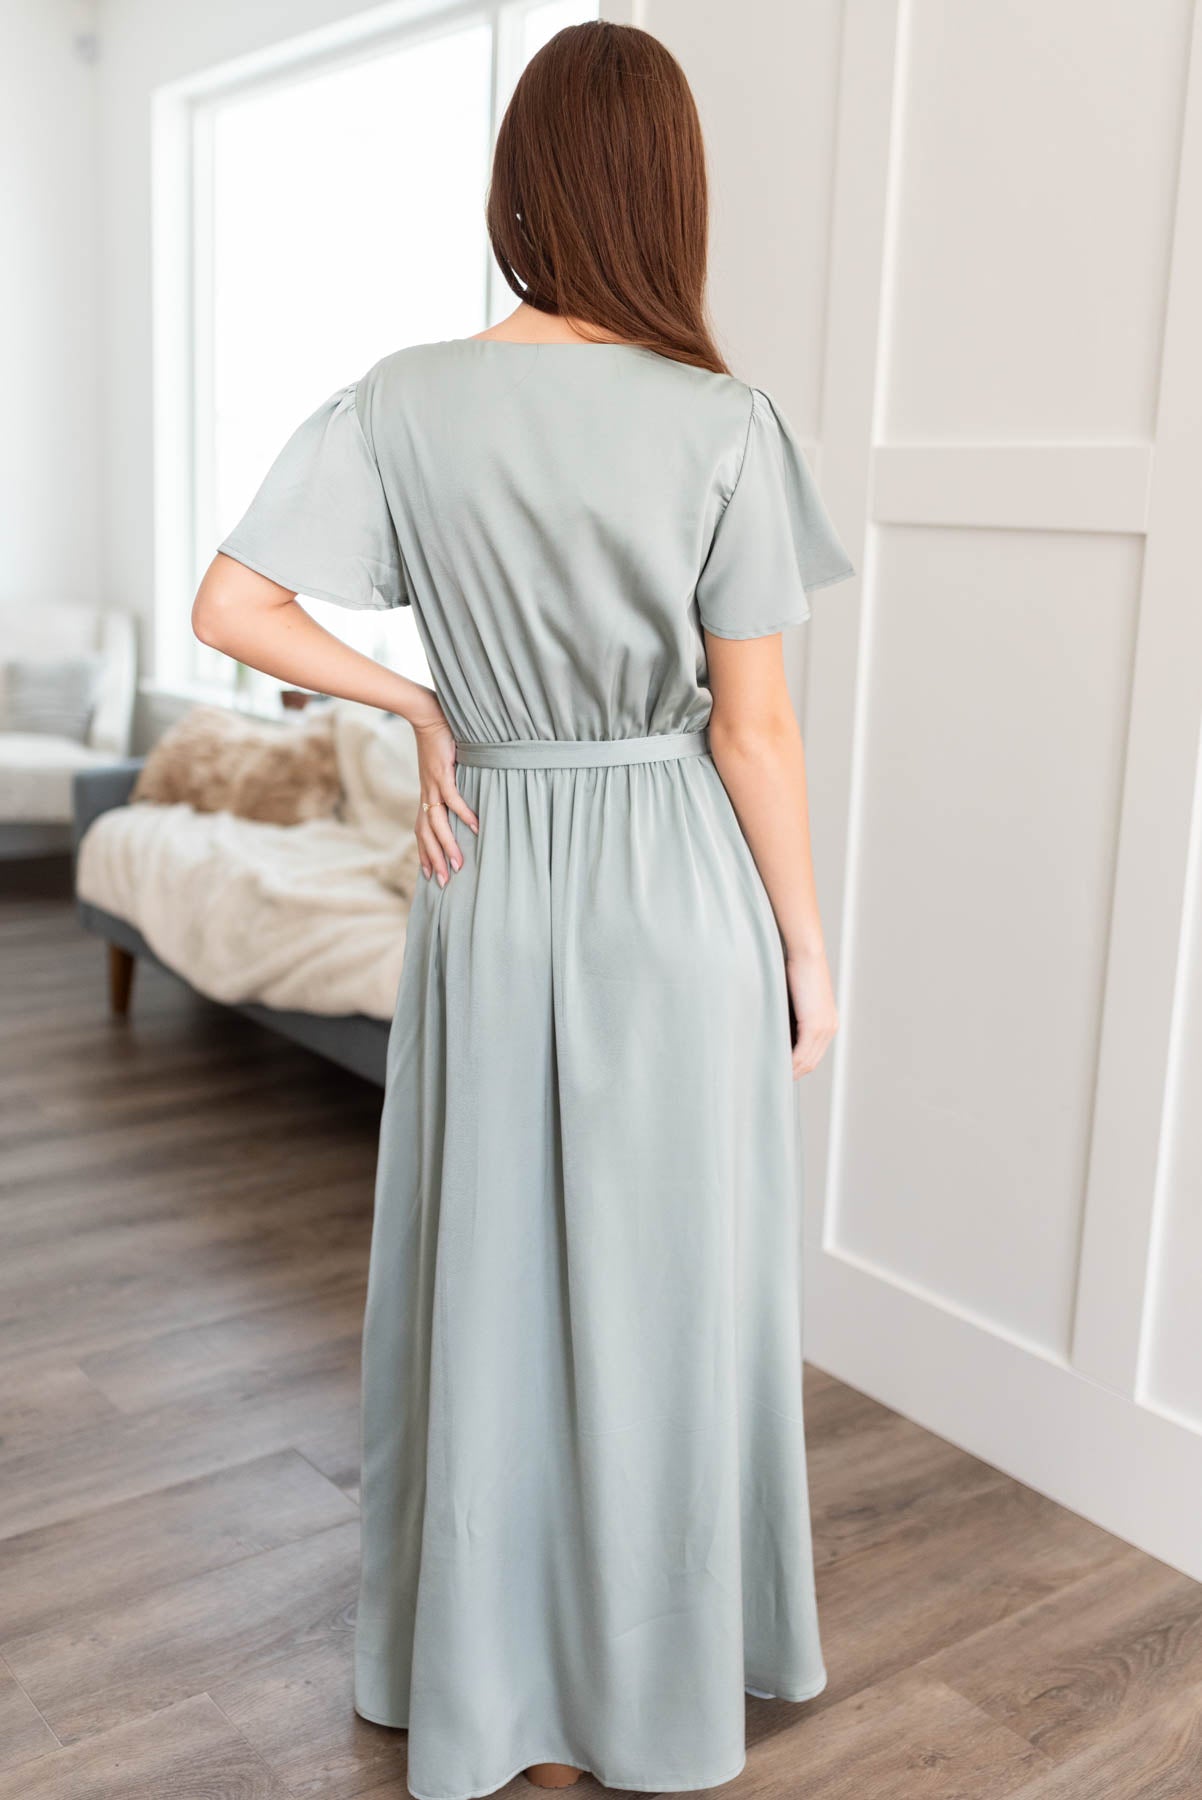 Back view of the sage satin dress